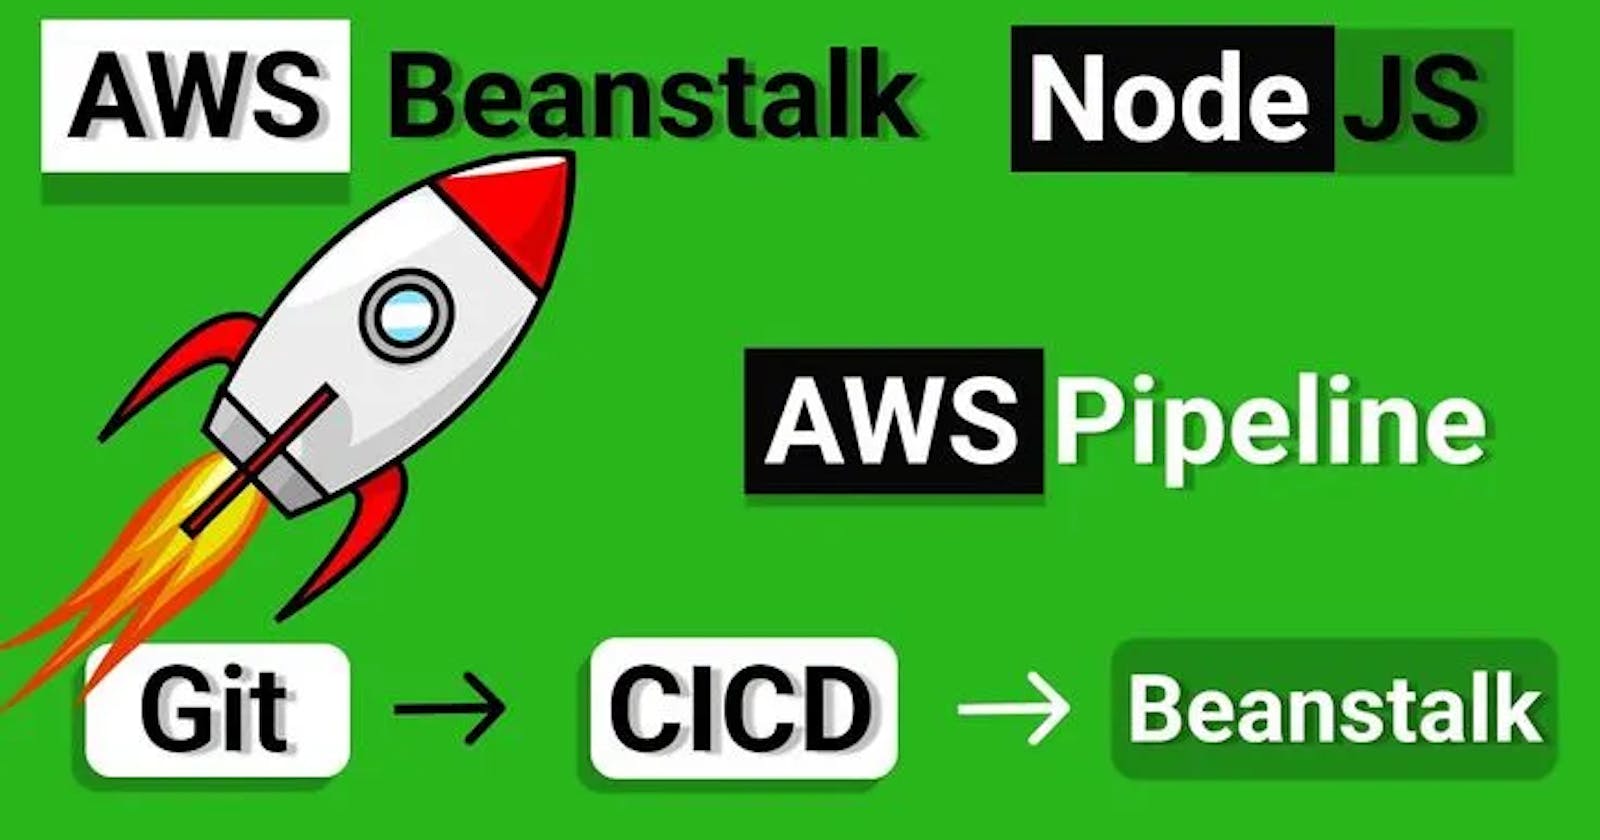 "From Code to Cloud: Automating Node.js Deployment with AWS Elastic Beanstalk and CodePipeline"